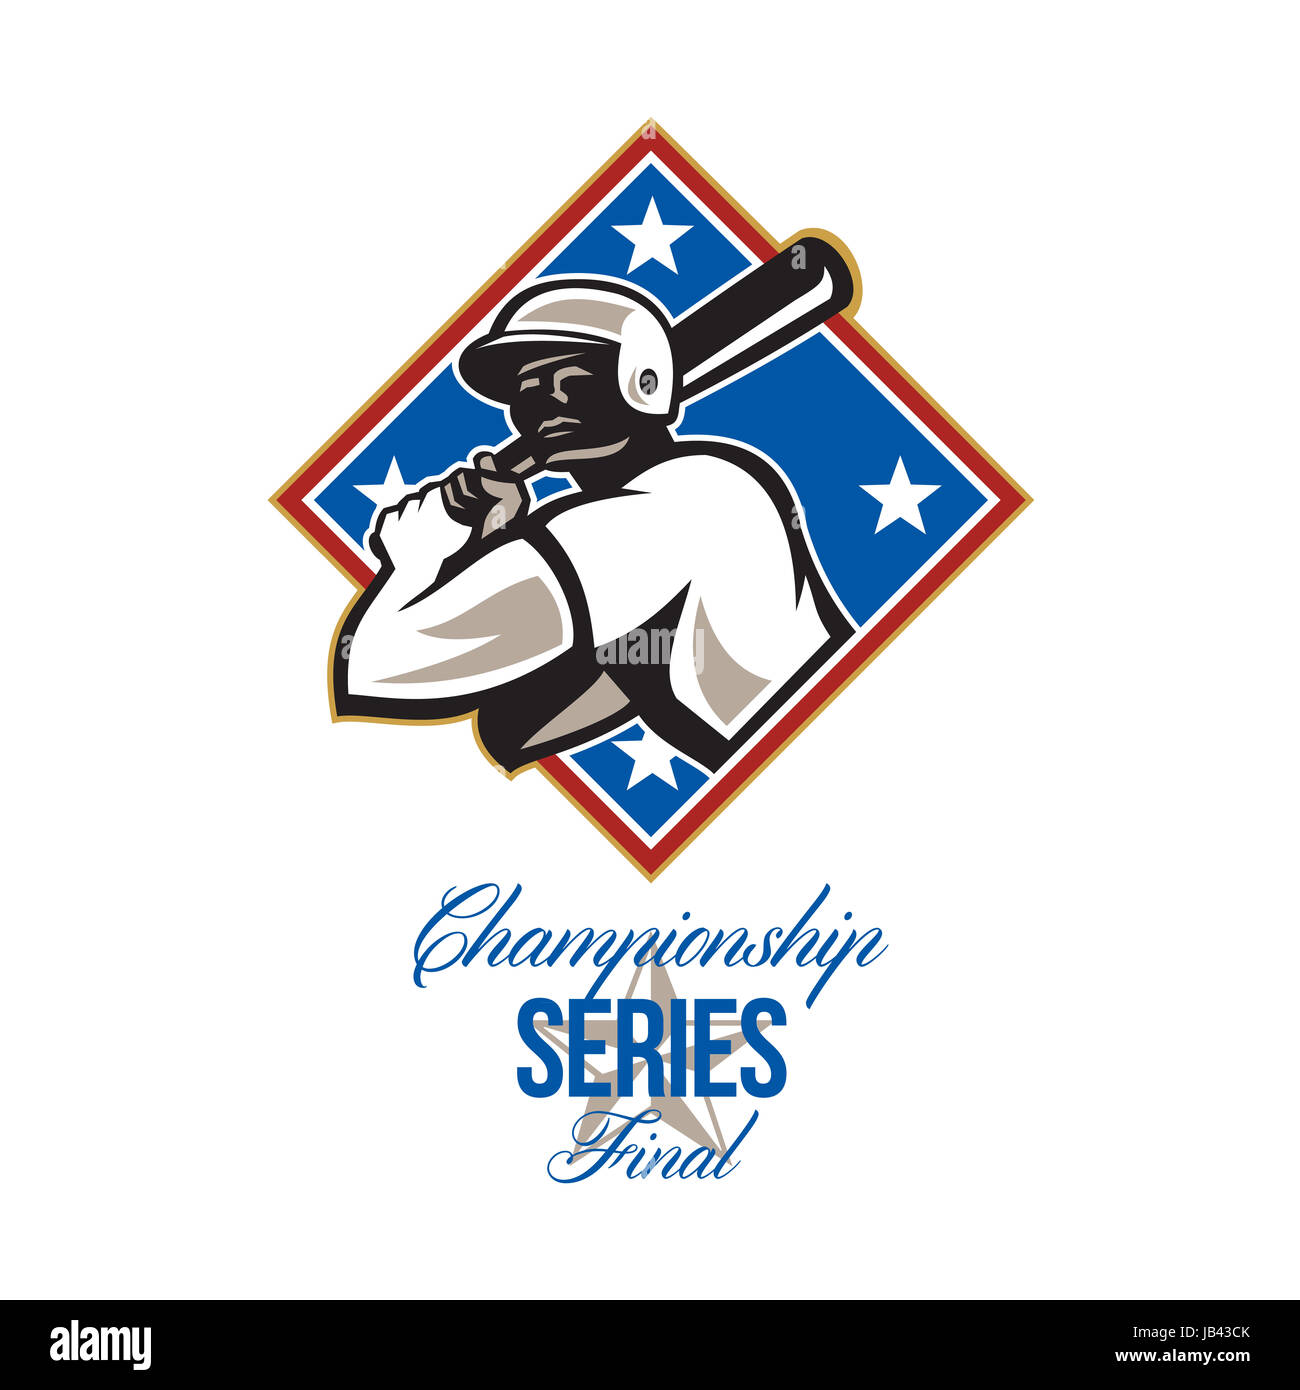 Illustration of a american baseball player batter hitter batting with bat set inside diamond shape with stars done in retro style with words Championship Series Final Stock Photo